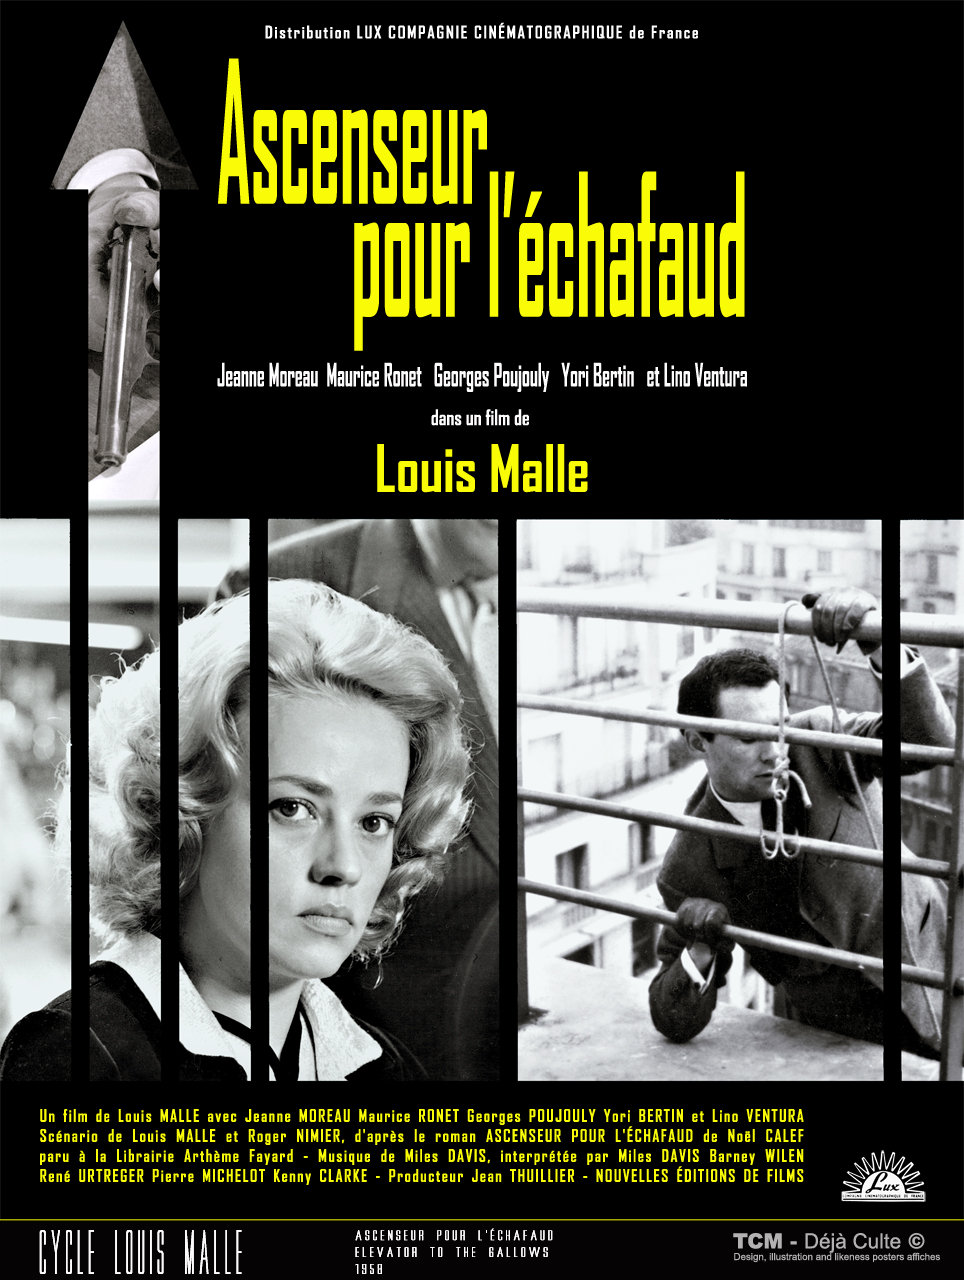 The Louis Malle Collection - Vol. 1 - ASENSEUR POUR L'ECHAFAUD (Elevator to  the Gallows) - 1958 LE FEU FOLLET (A Time to Live and a Time to Die) - 1963  LES